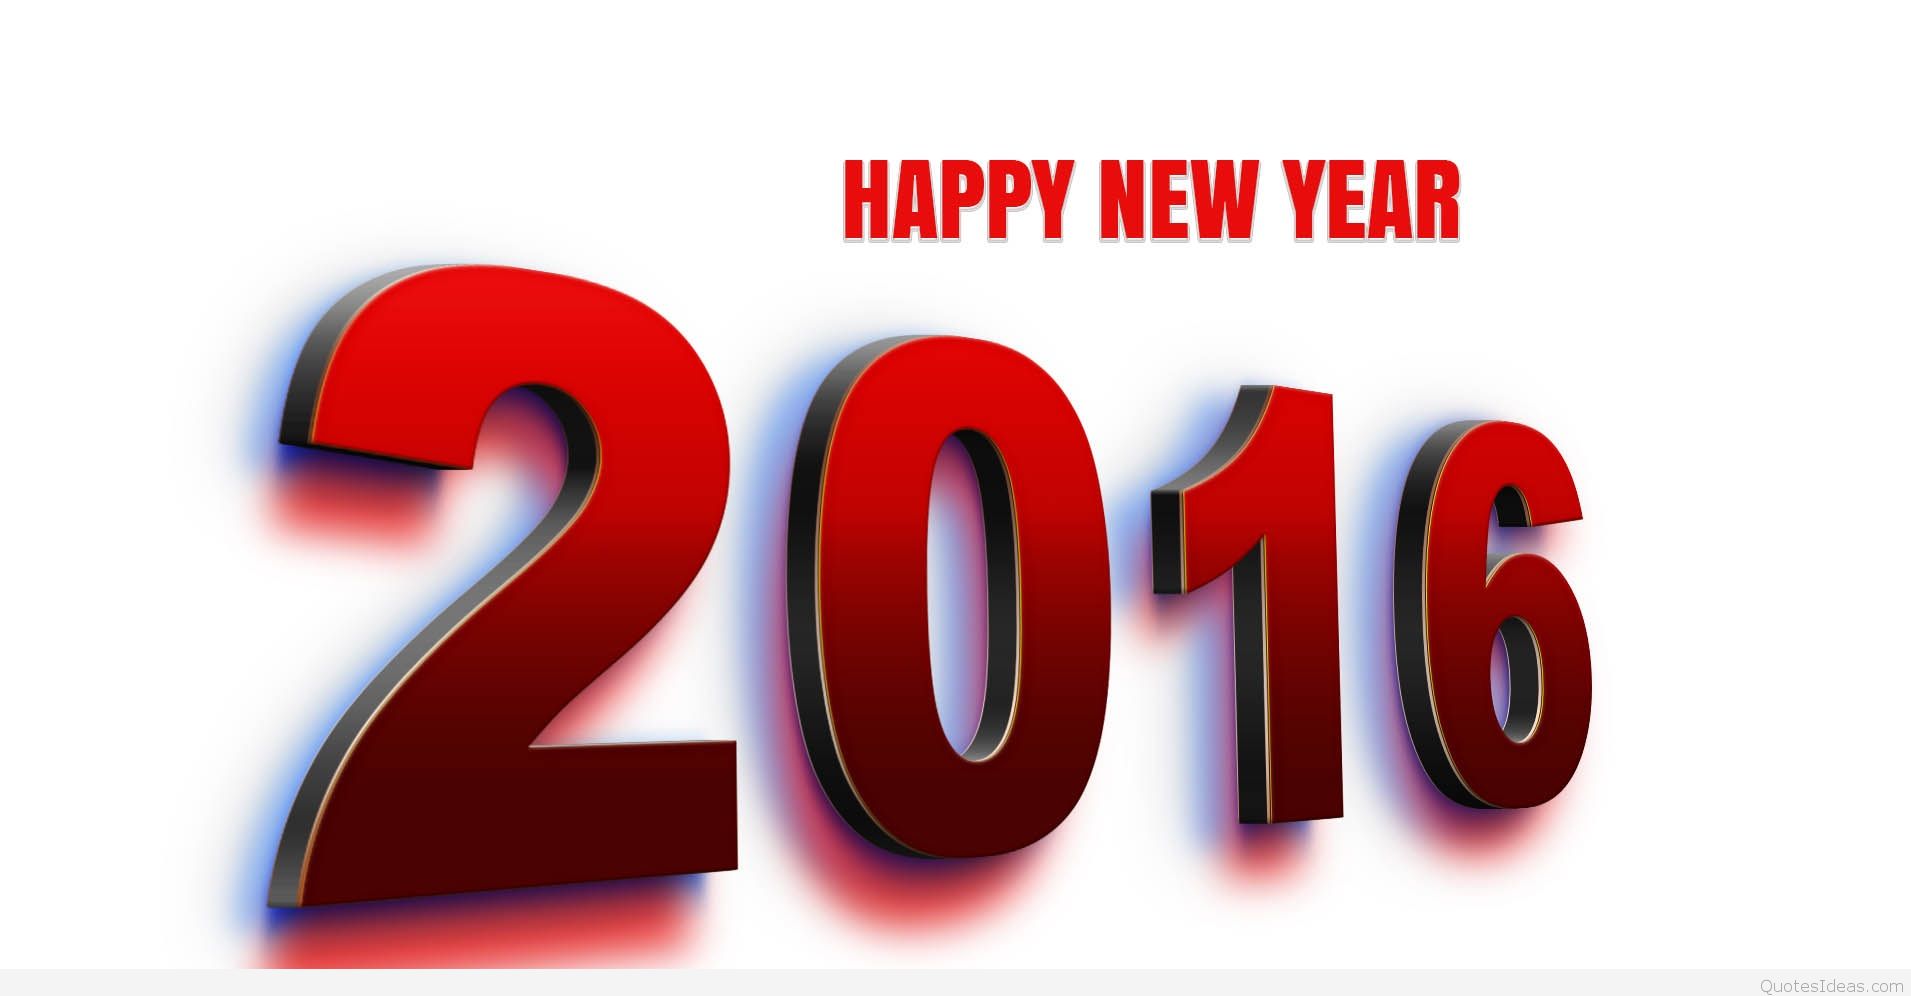 Happy New Year Image Free Download Png Clipart